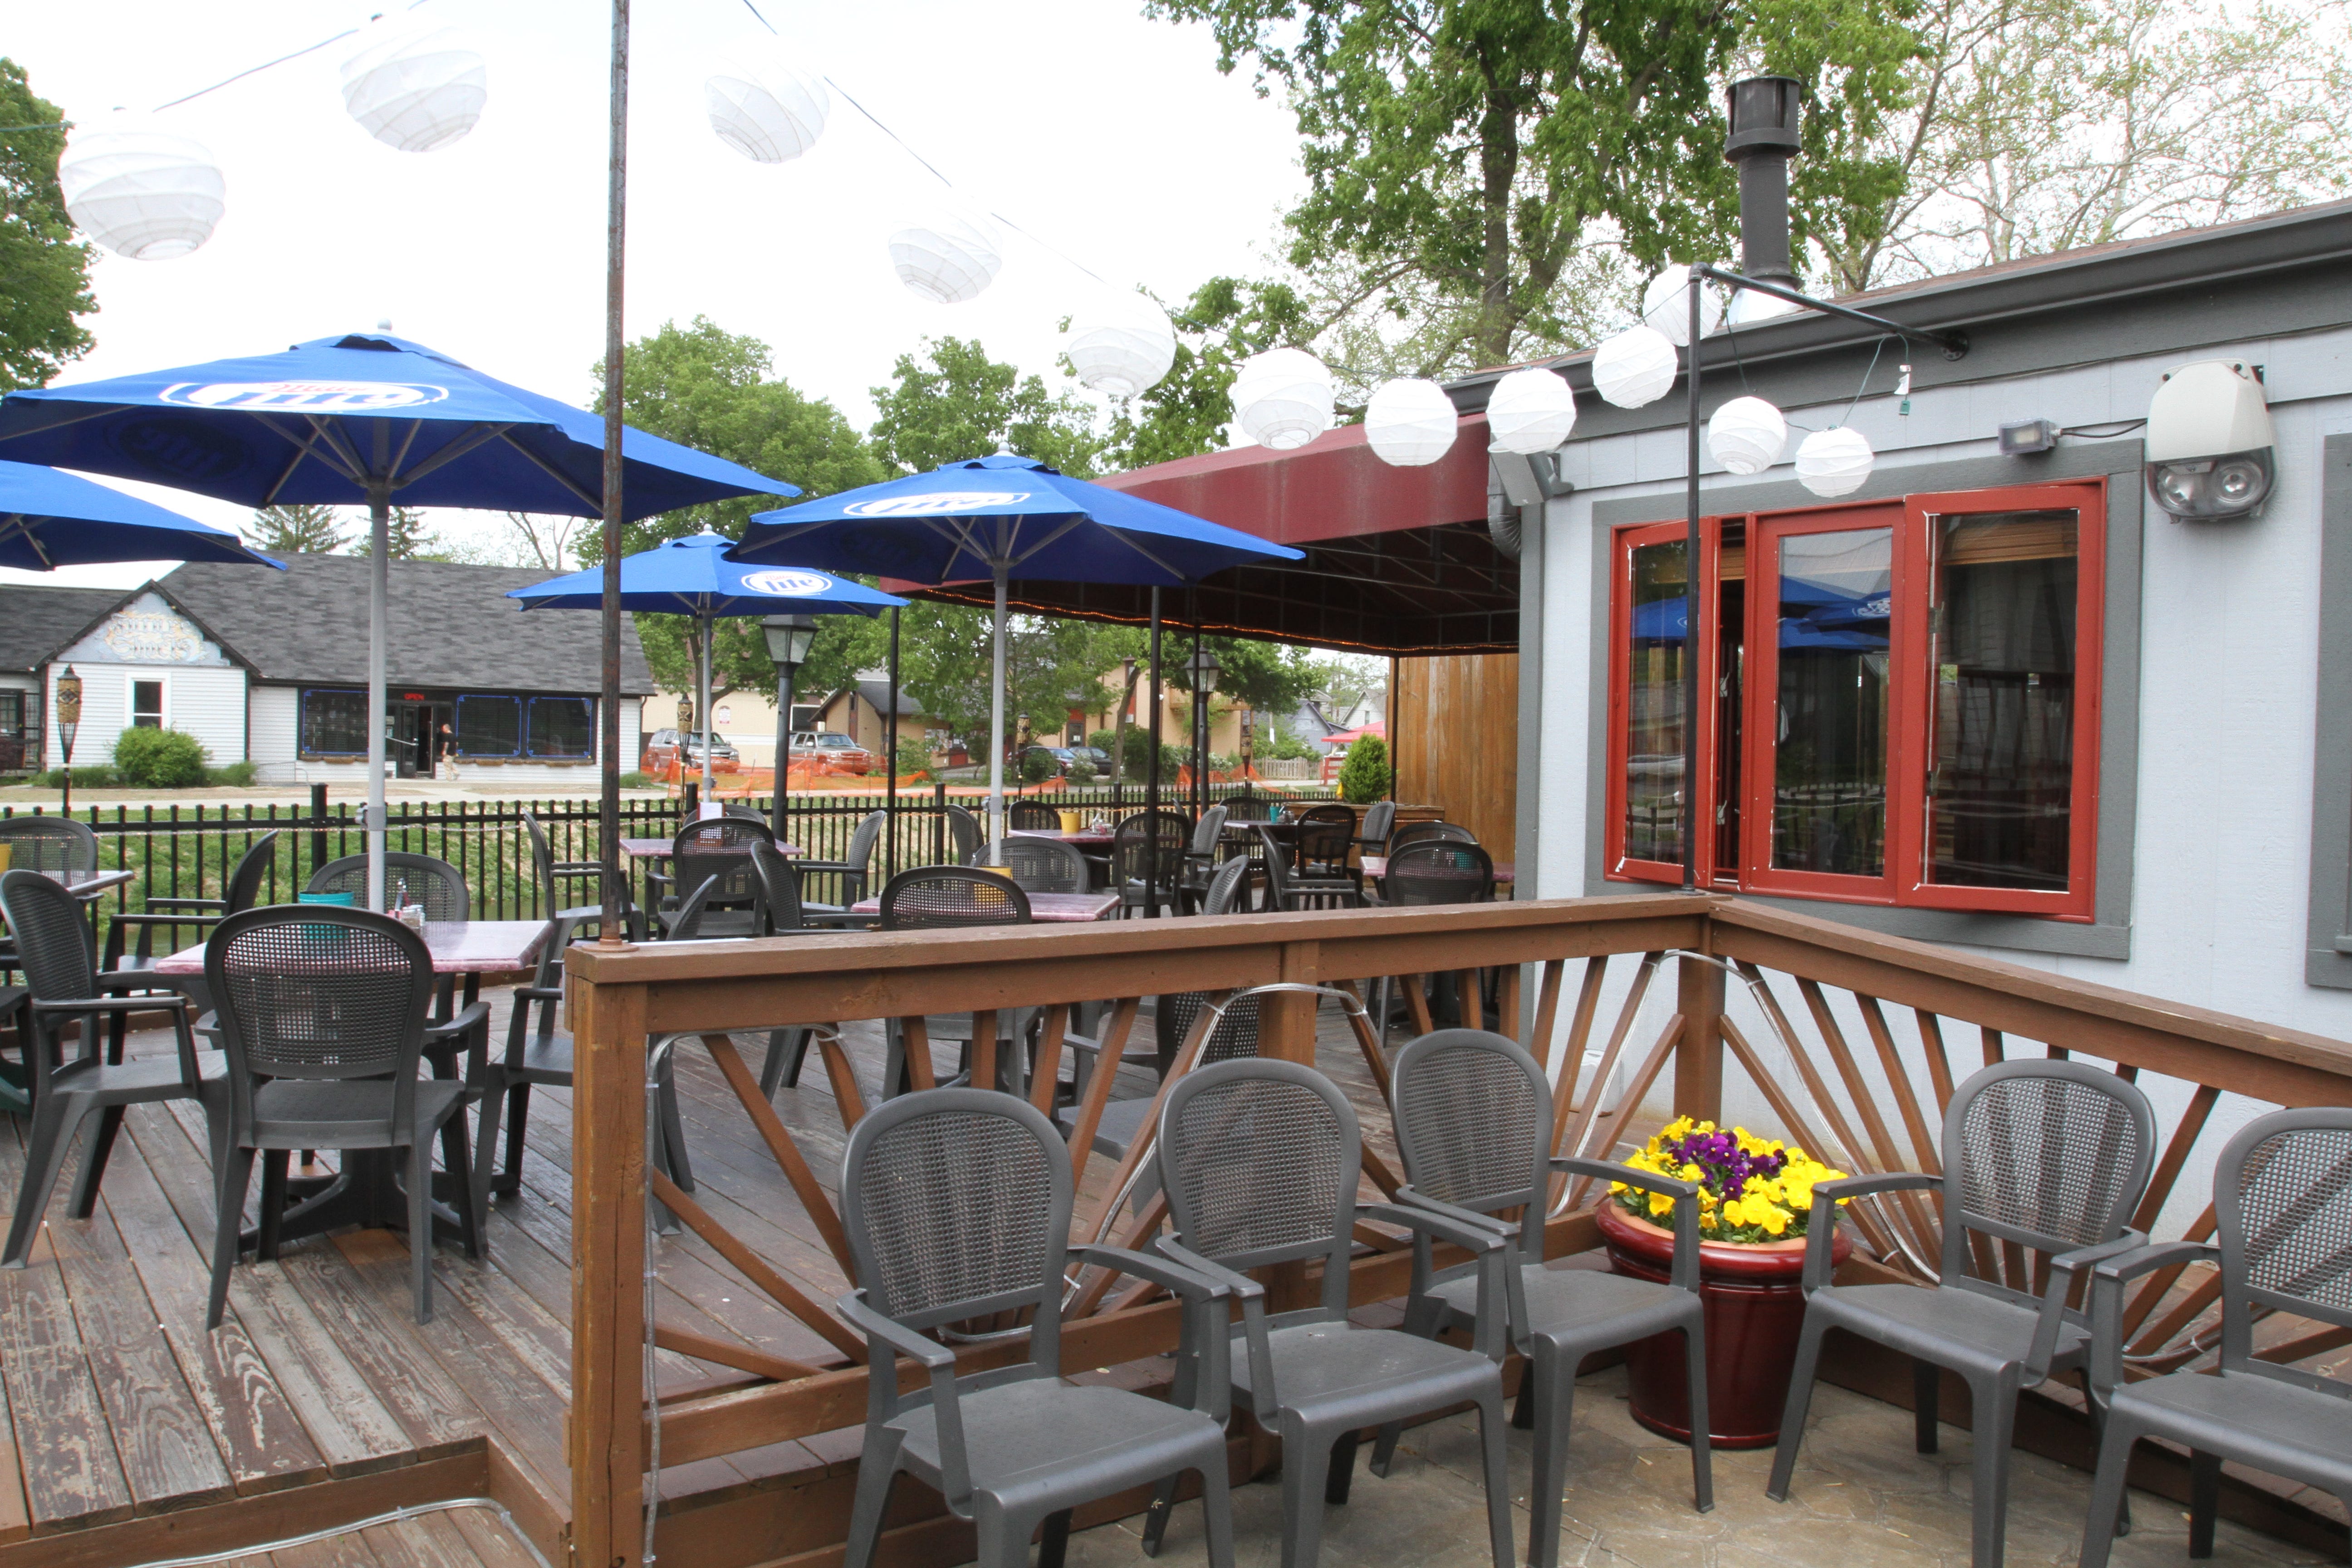 restaurants with outdoor seating